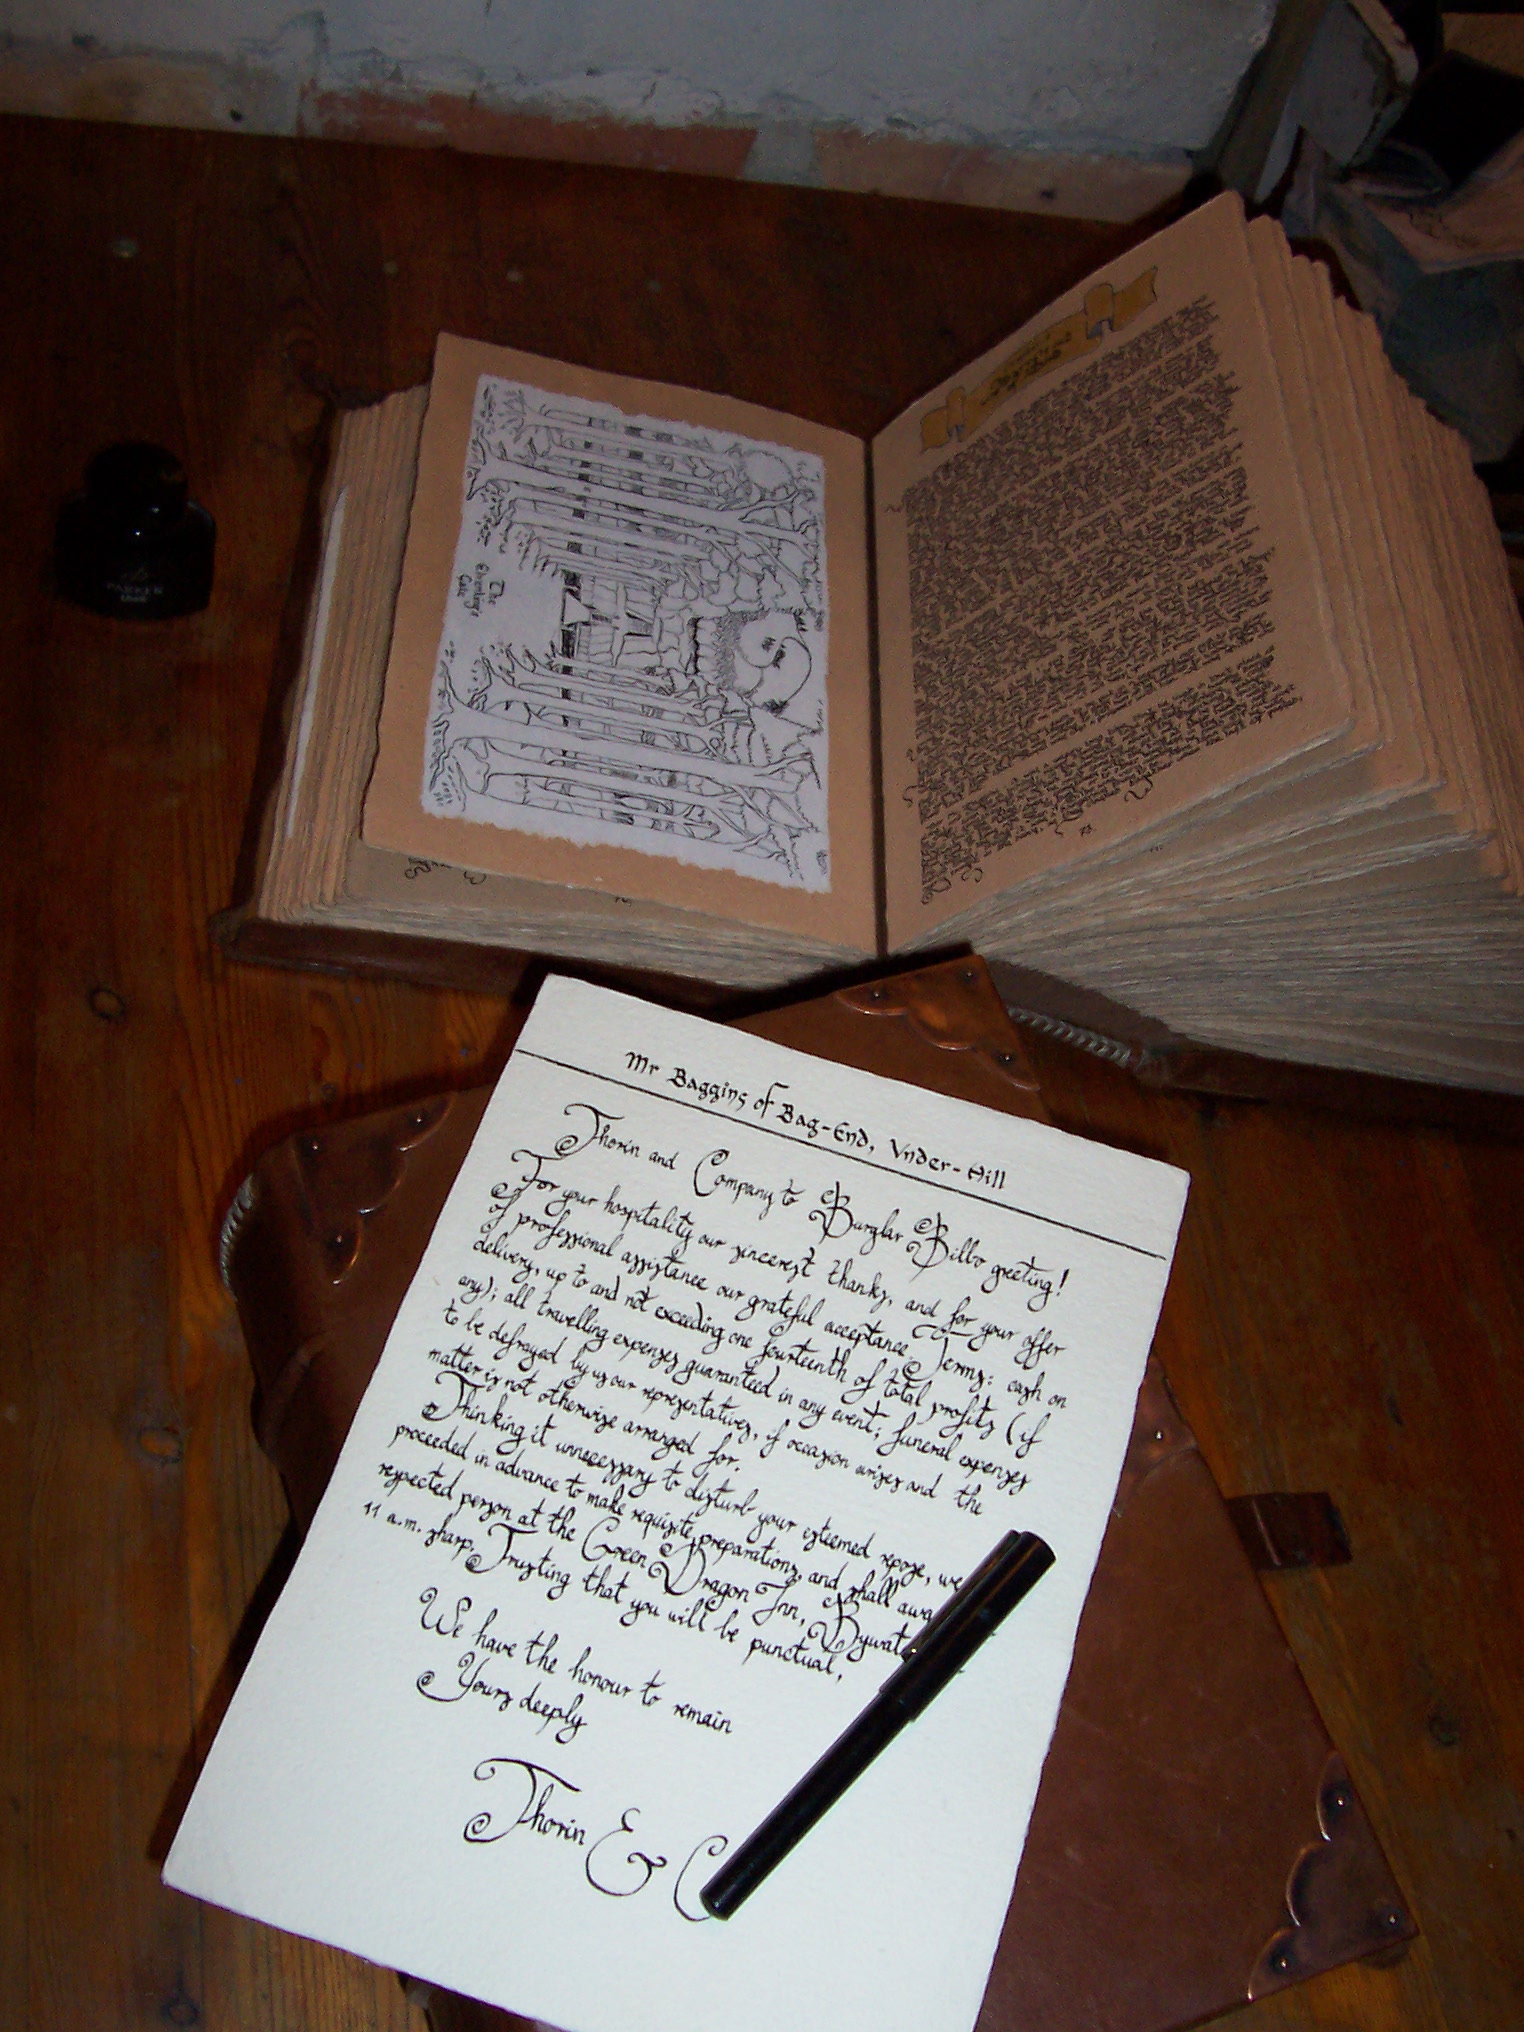 A view on the handwritten book